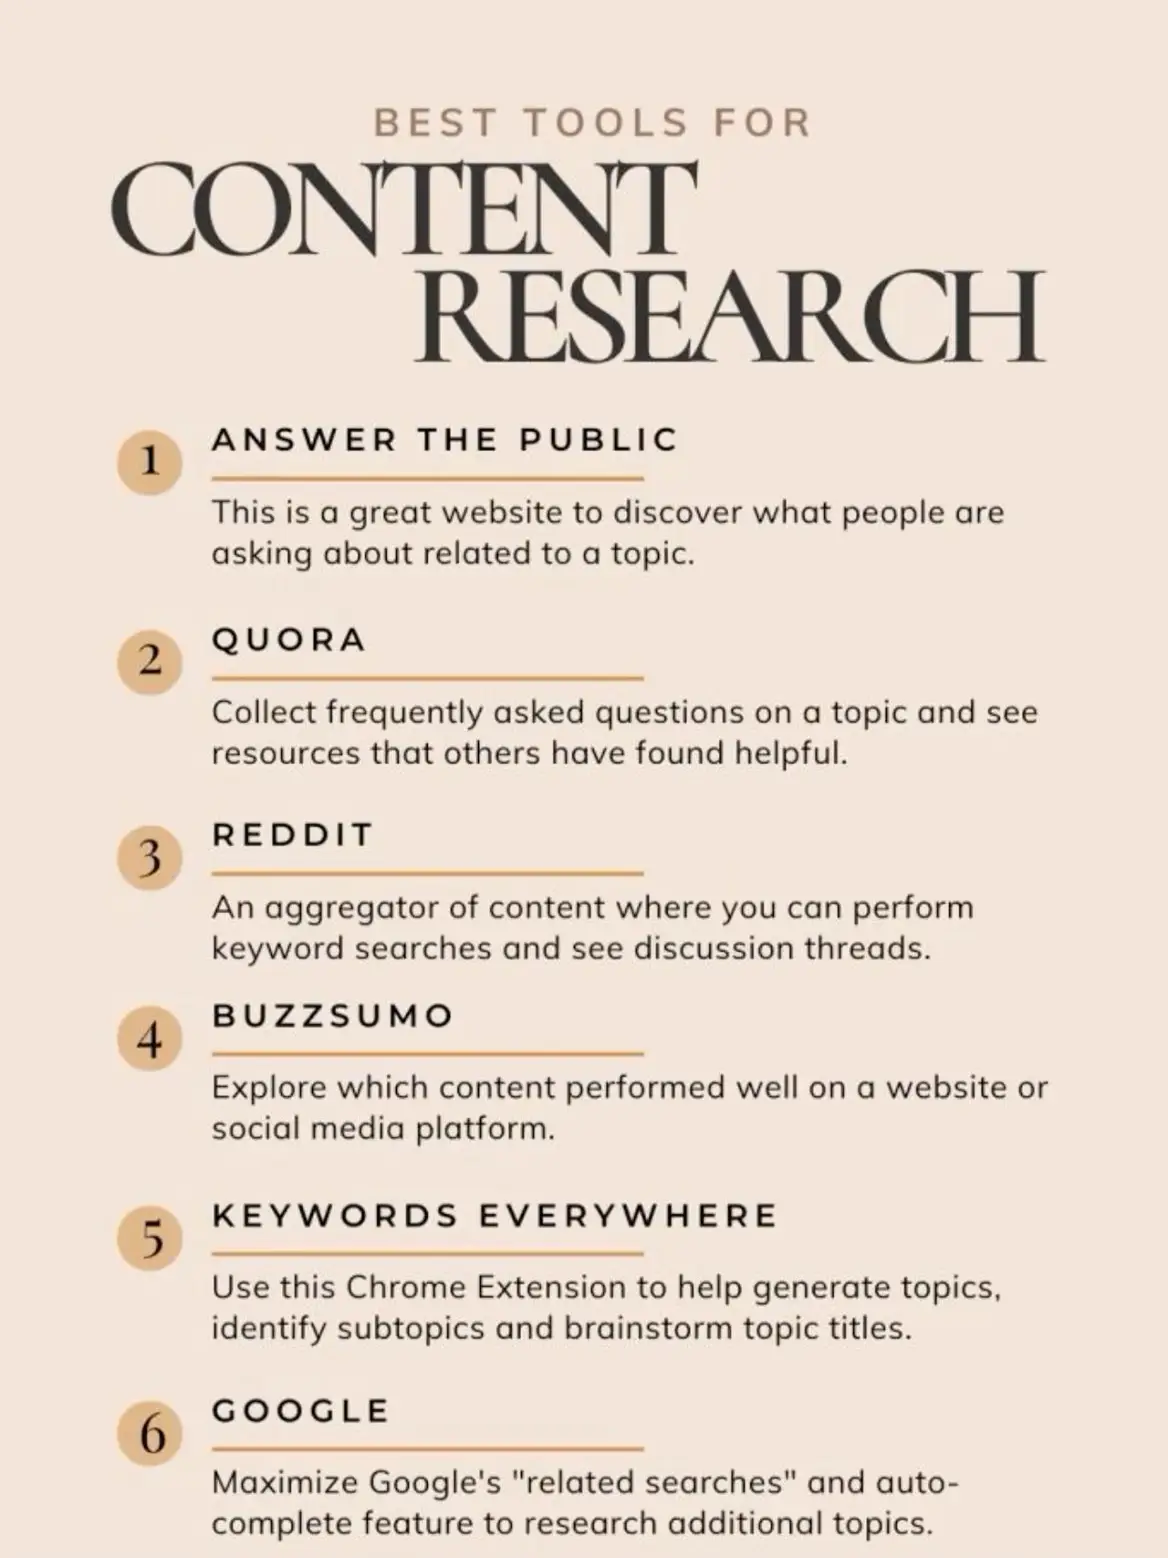  A list of the best tools for content research.